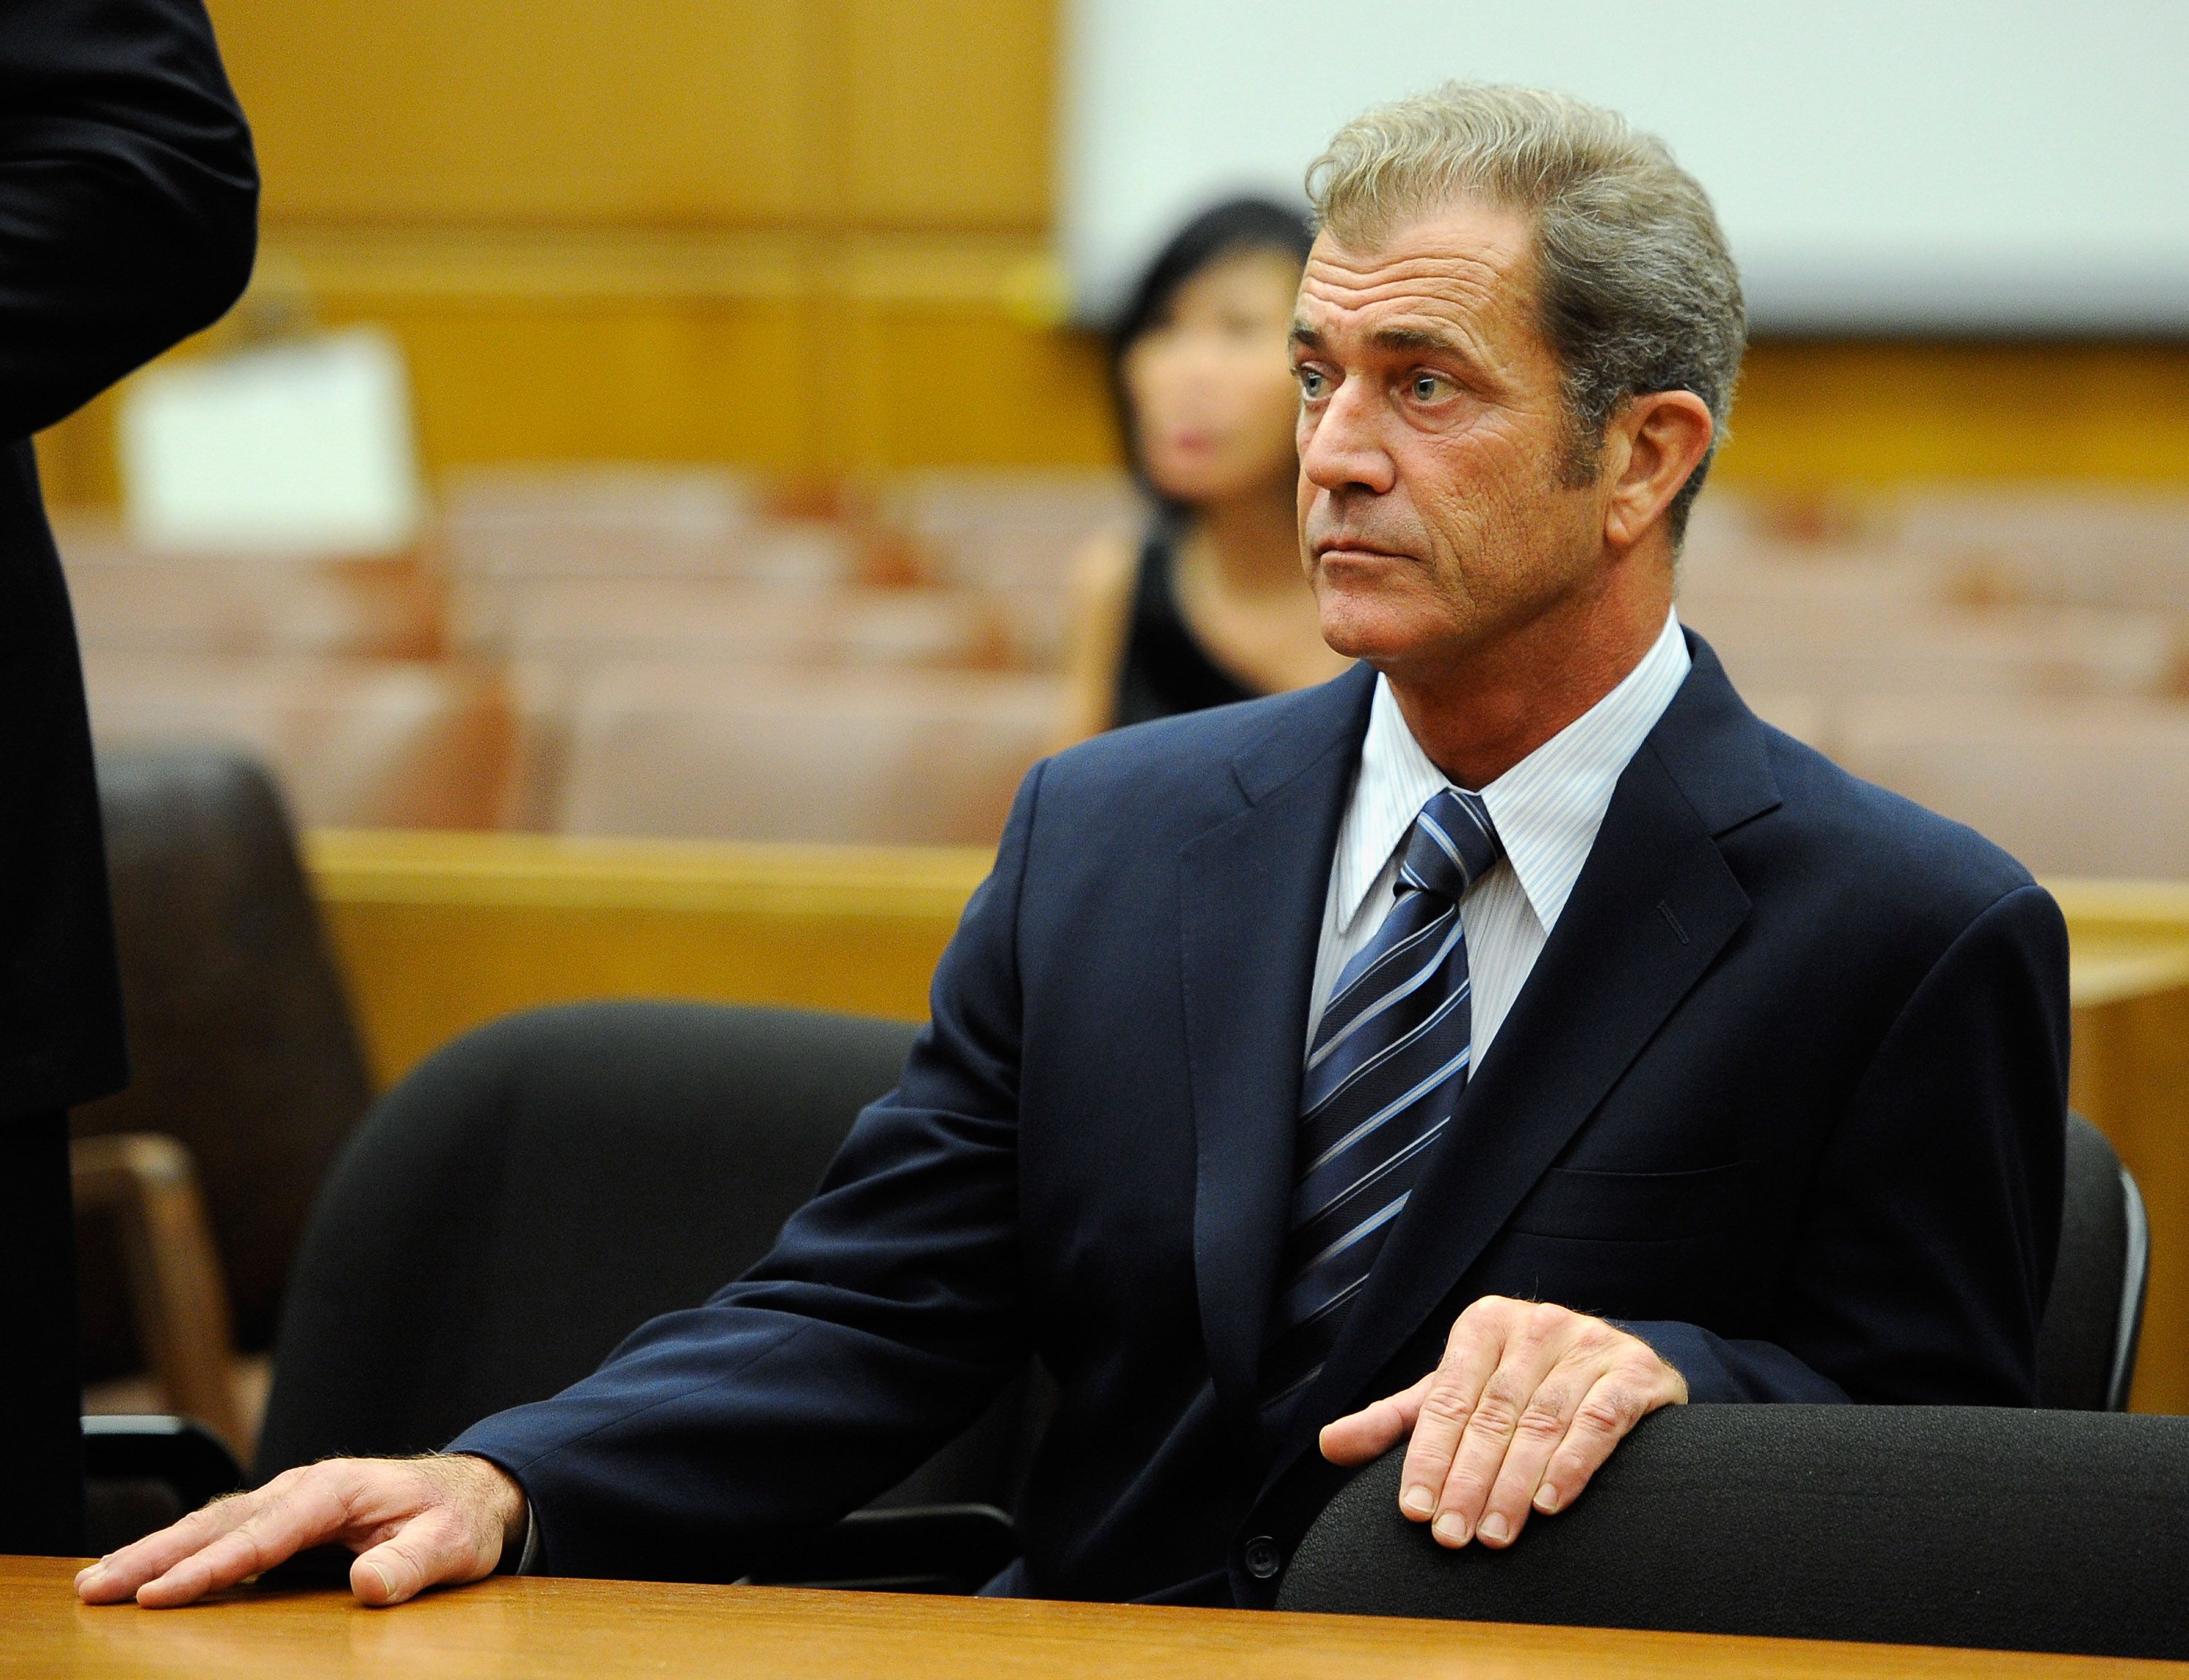 Mel Gibson at a hearing in a Los Angeles County Courthouse to finalize financial issues with Oksana Grigorieva in August 2011 | Photo: Getty Images